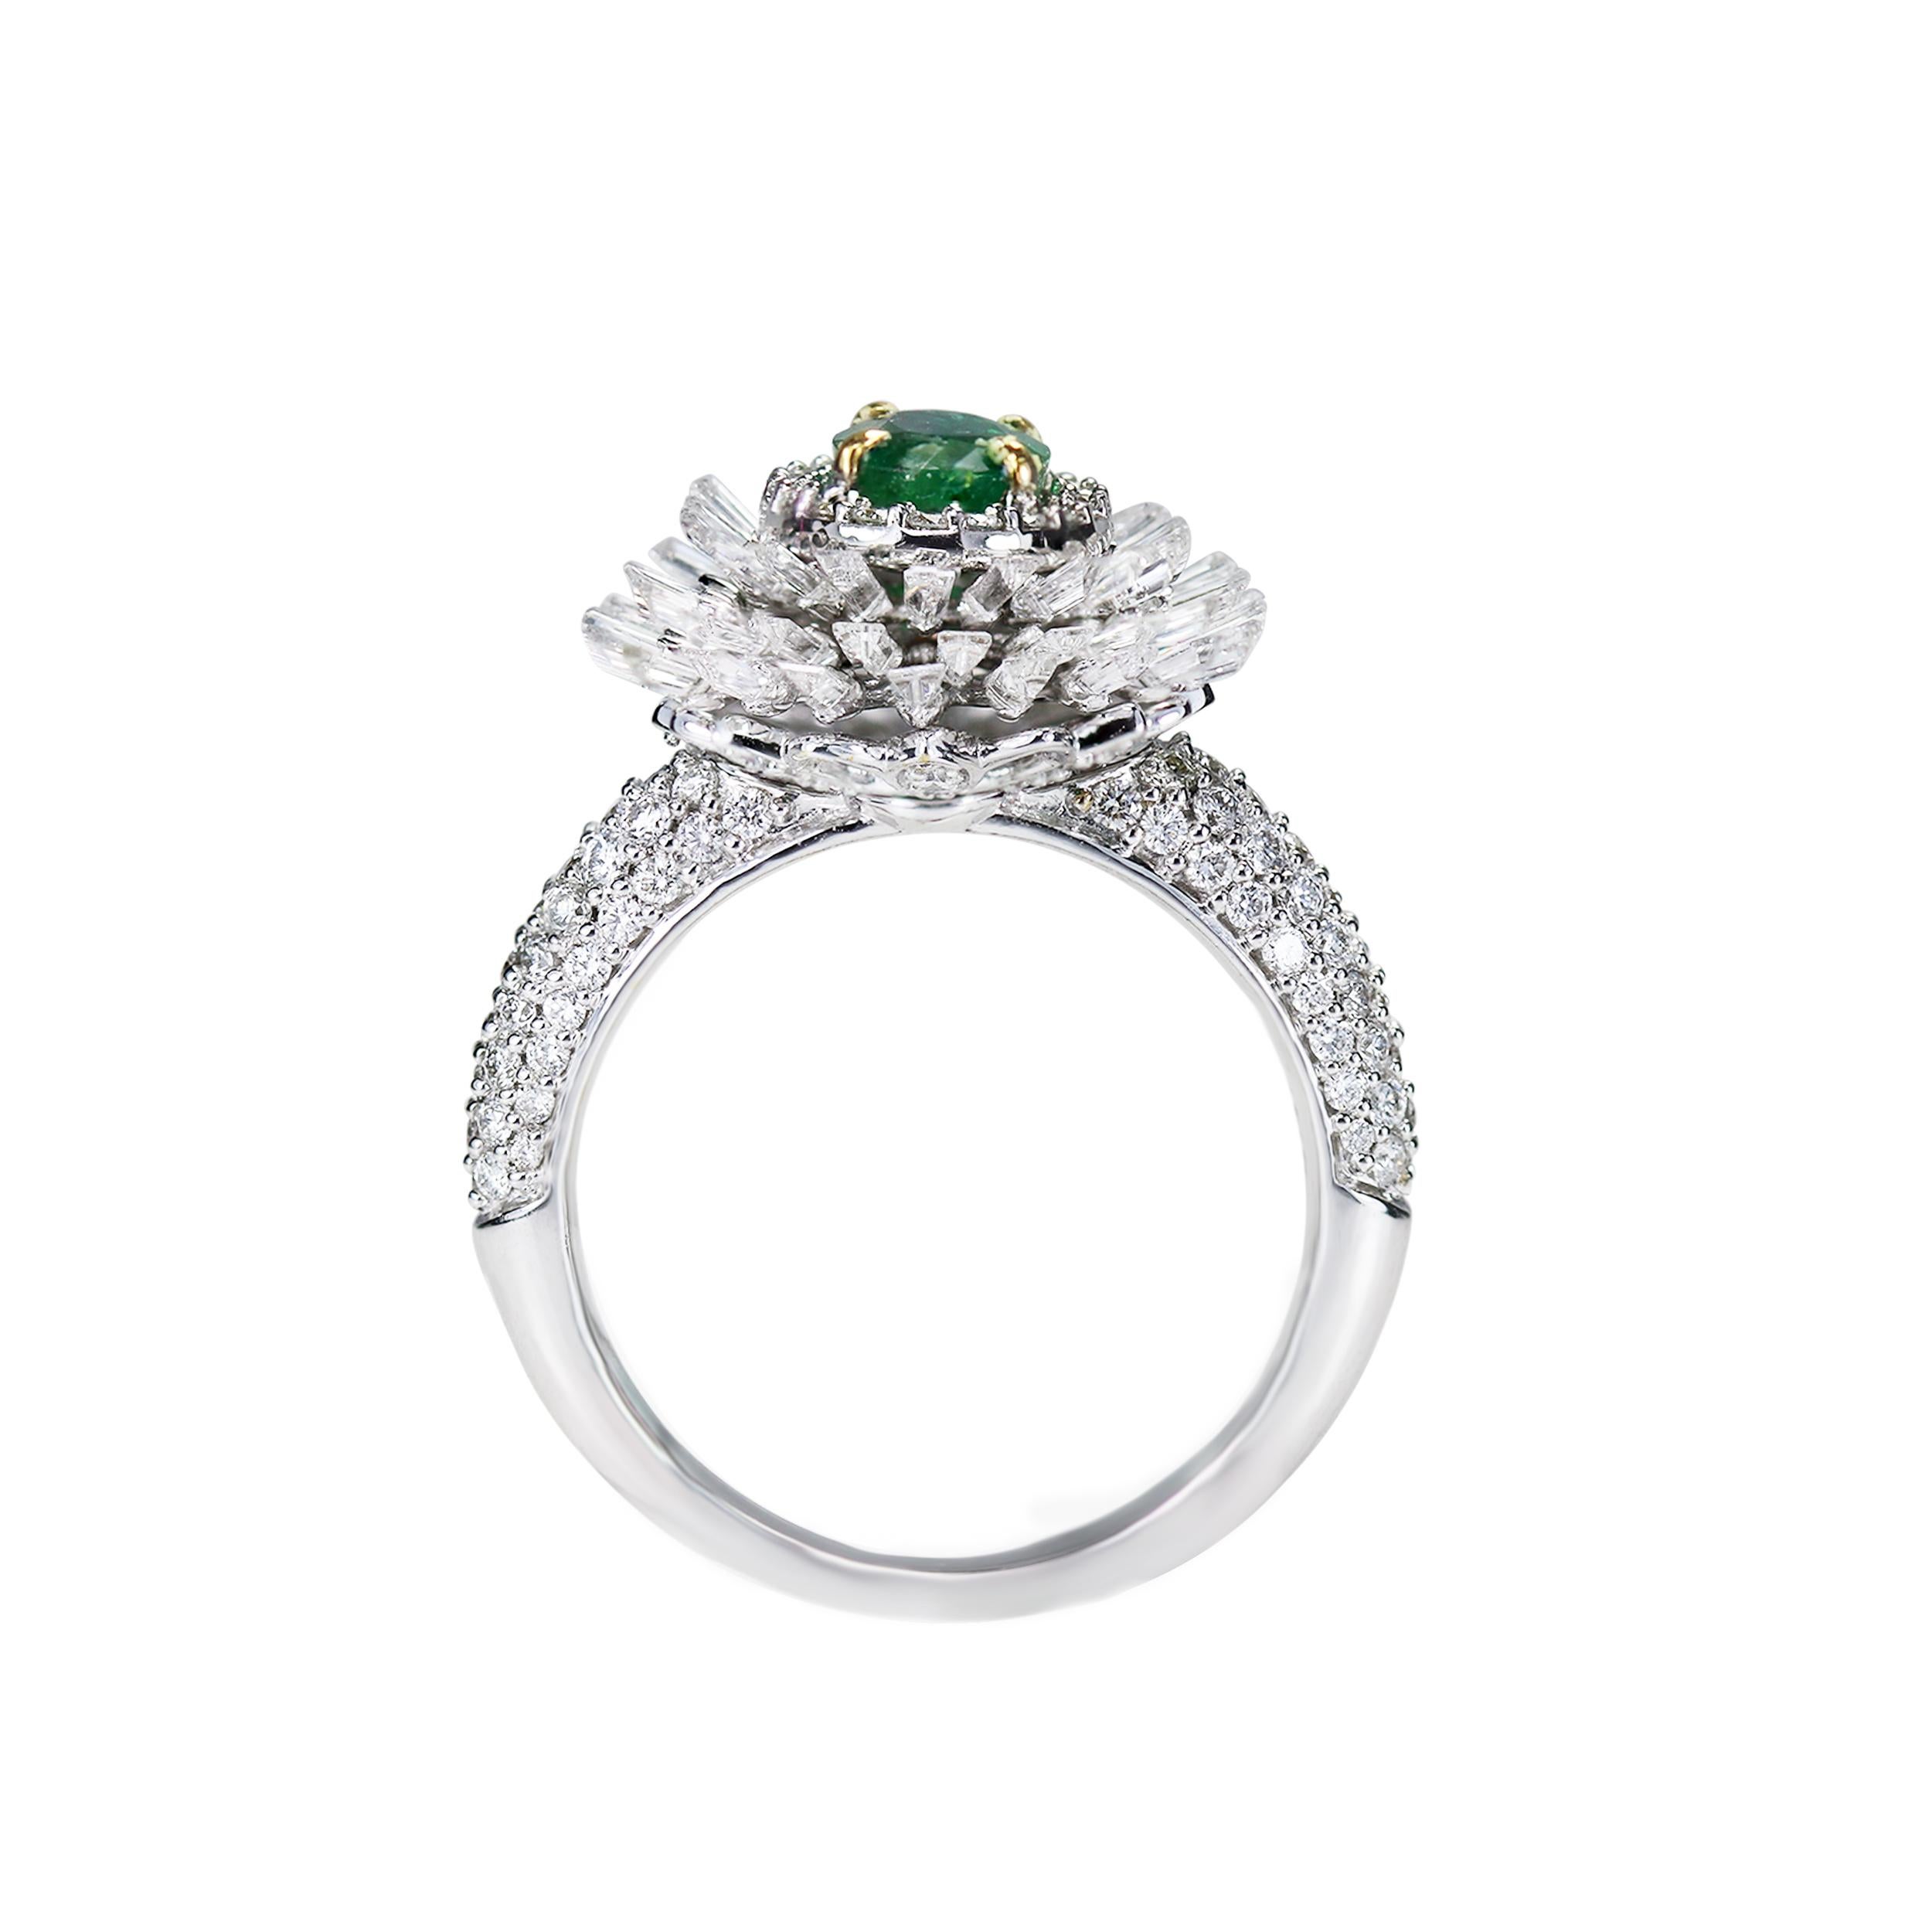 Diamond and emerald ring

A piece of jewellery that brightens up a room with its sparkle is worth owning. This 18K white gold ring studded generously with round and baguettes brilliant cut diamonds and a showstopping emerald is a must-have.